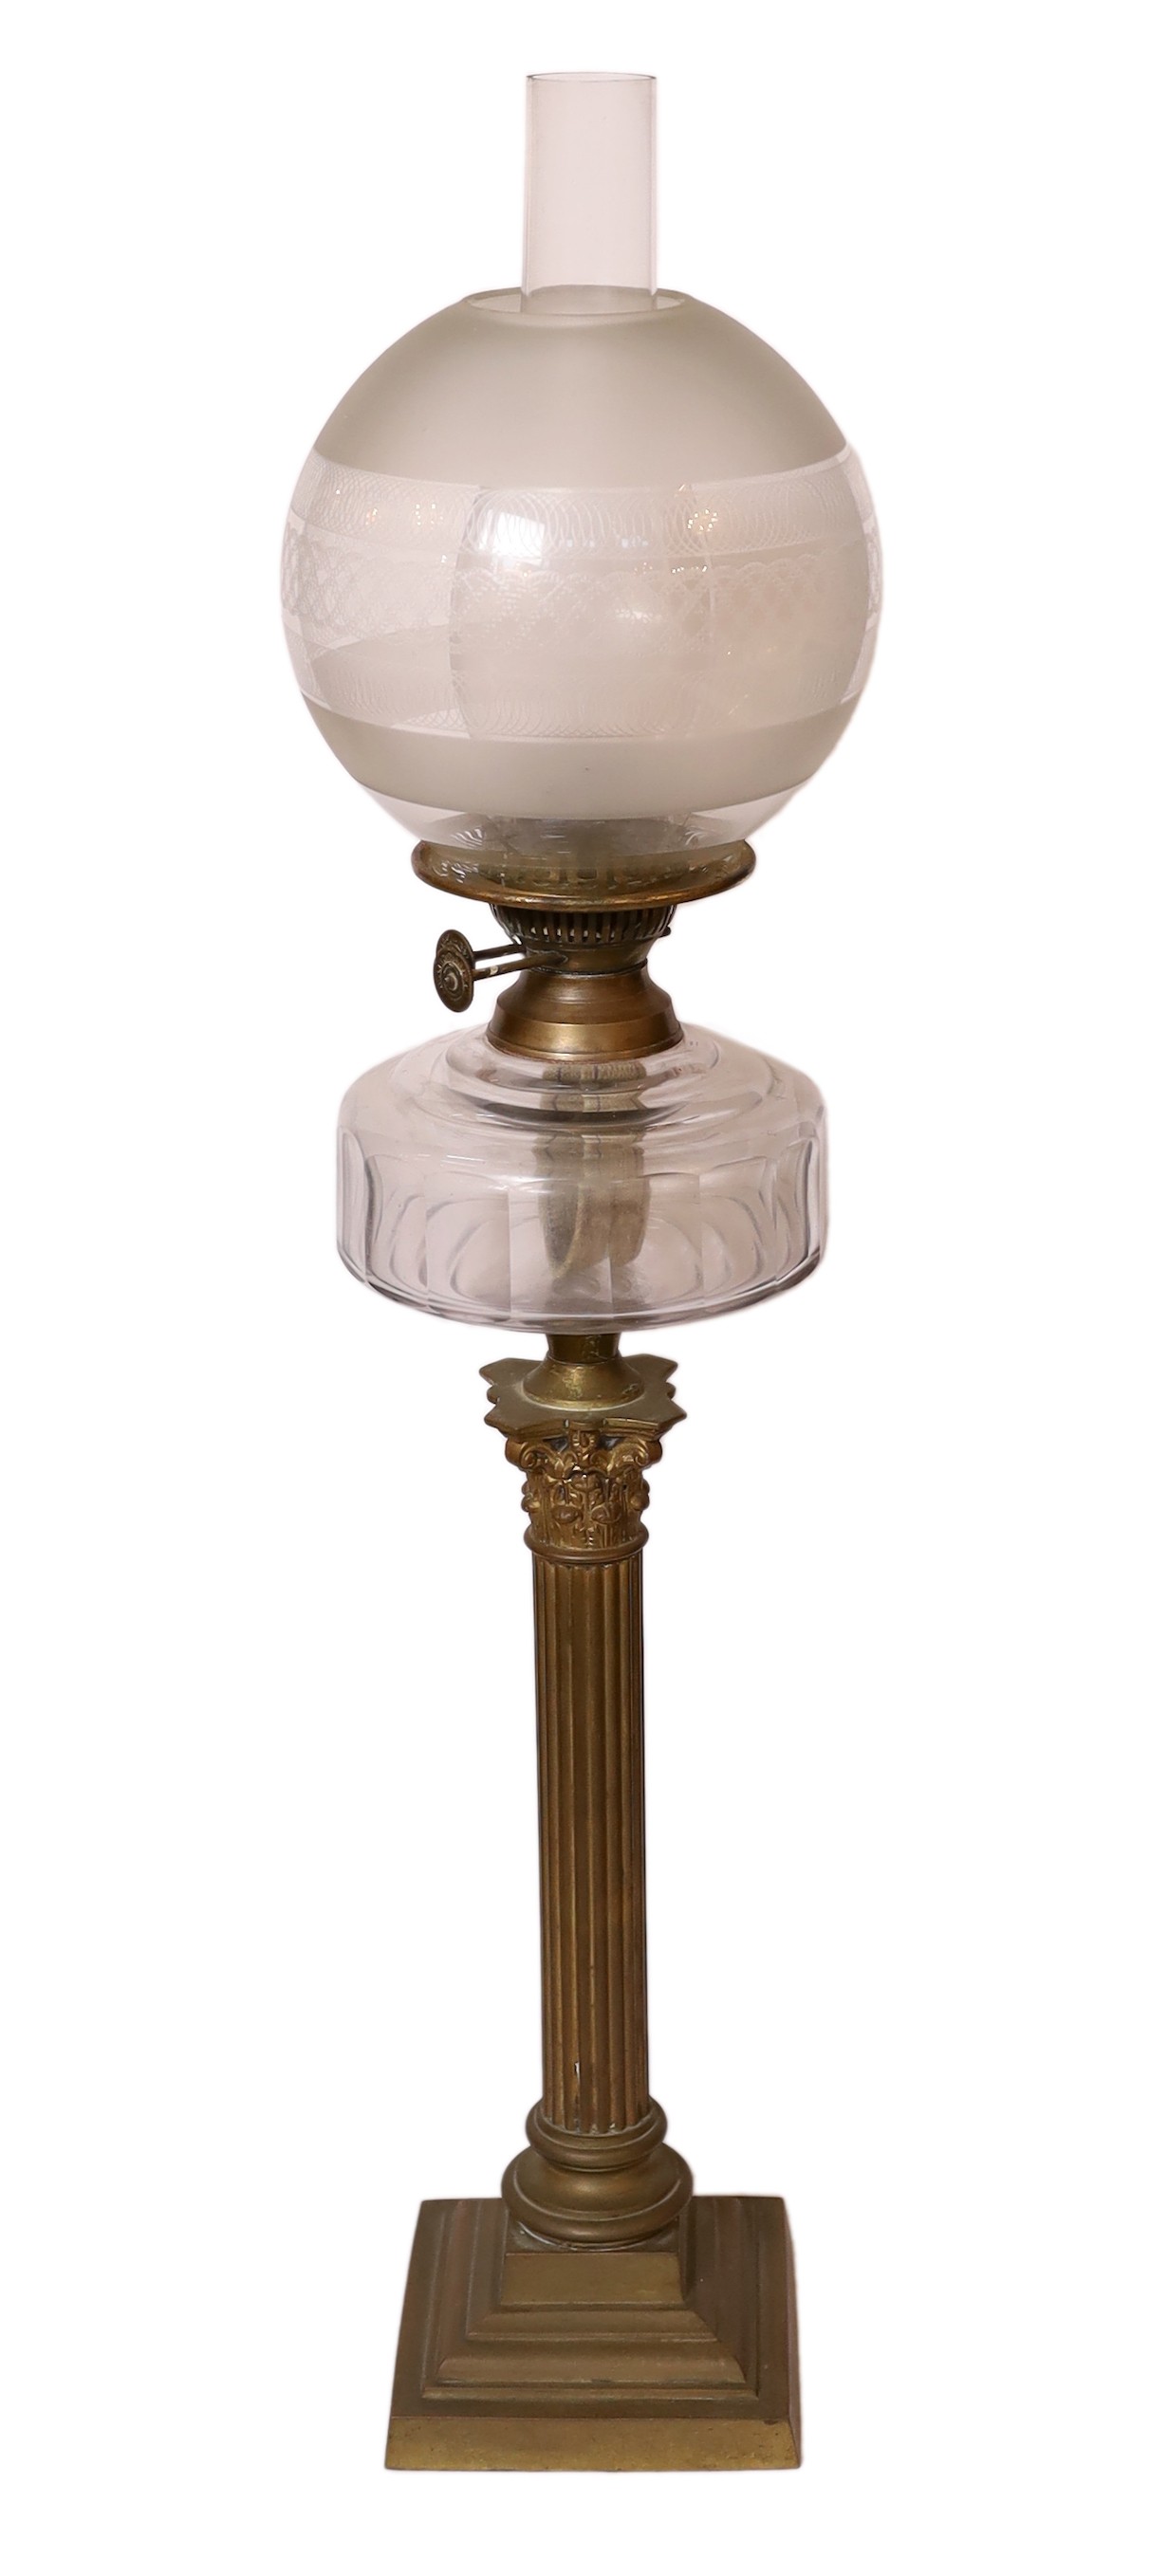 An Edwardian brass Corinthian column oil lamp with glass reservoir and etched glass shade, height overall 80cm